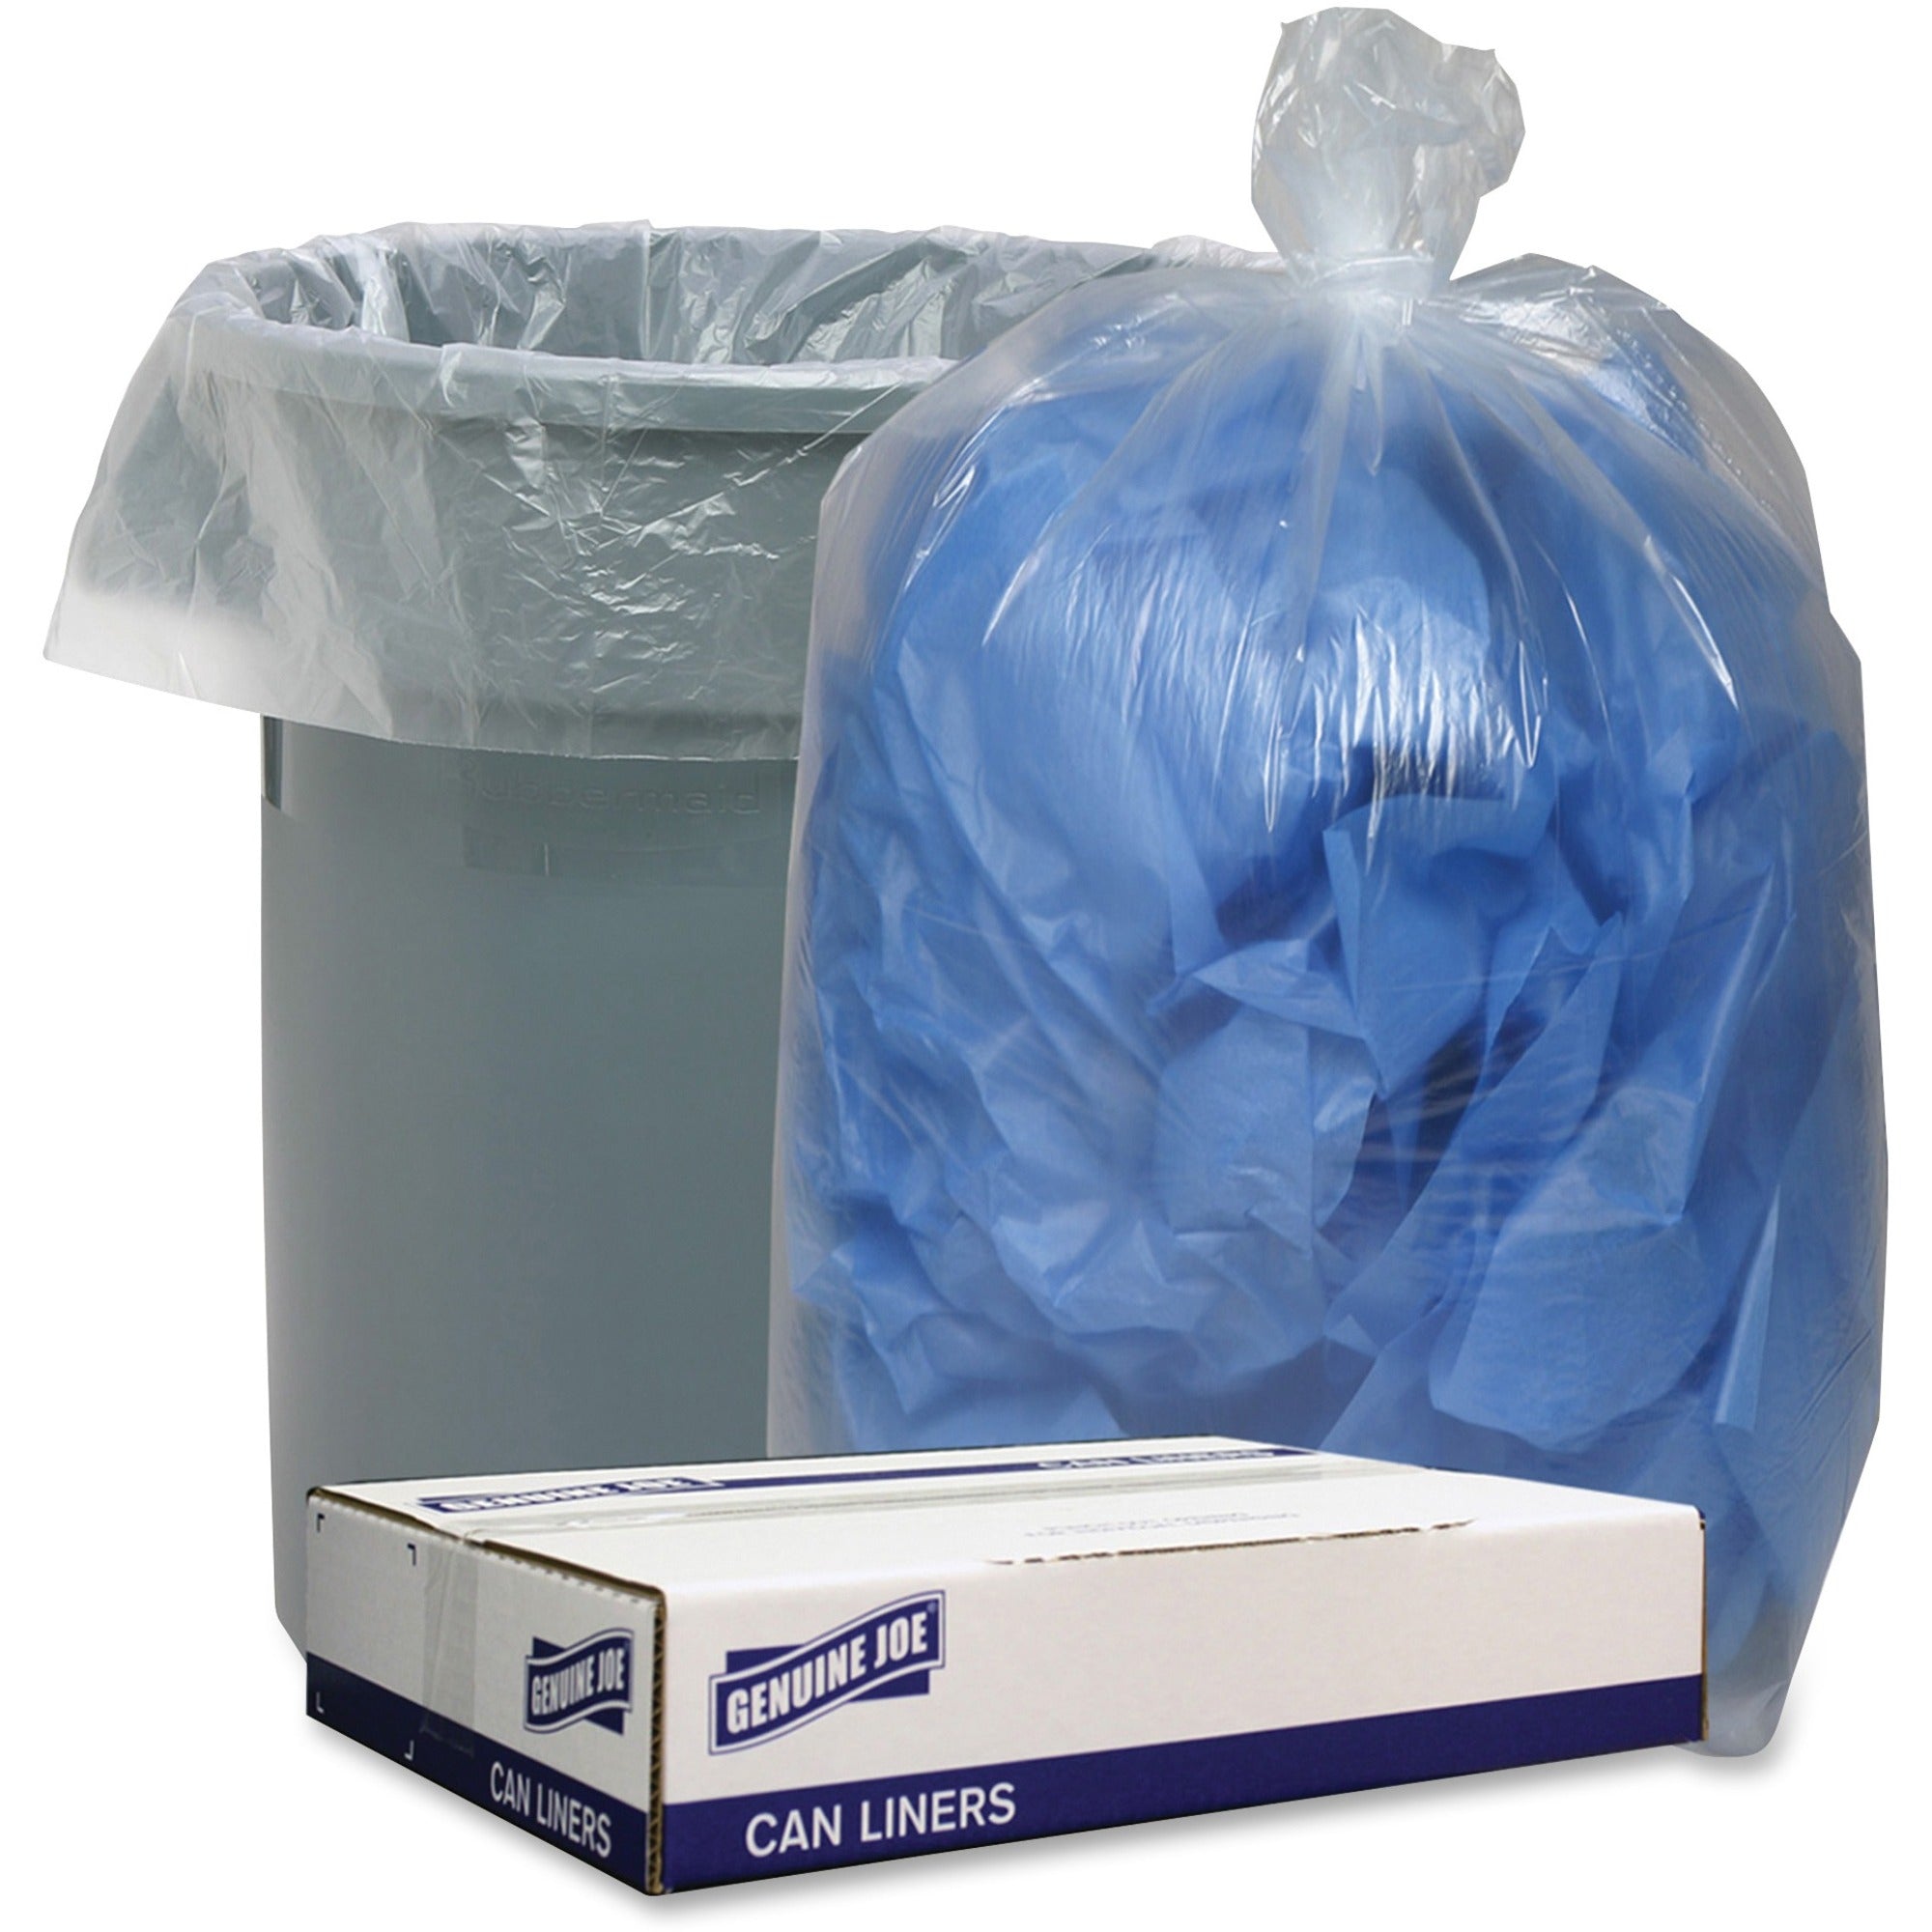 genuine-joe-clear-low-density-can-liners-33-gal-capacity-33-width-x-39-length-110-mil-28-micron-thickness-low-density-clear-100-carton-recycled_gjo29125 - 1